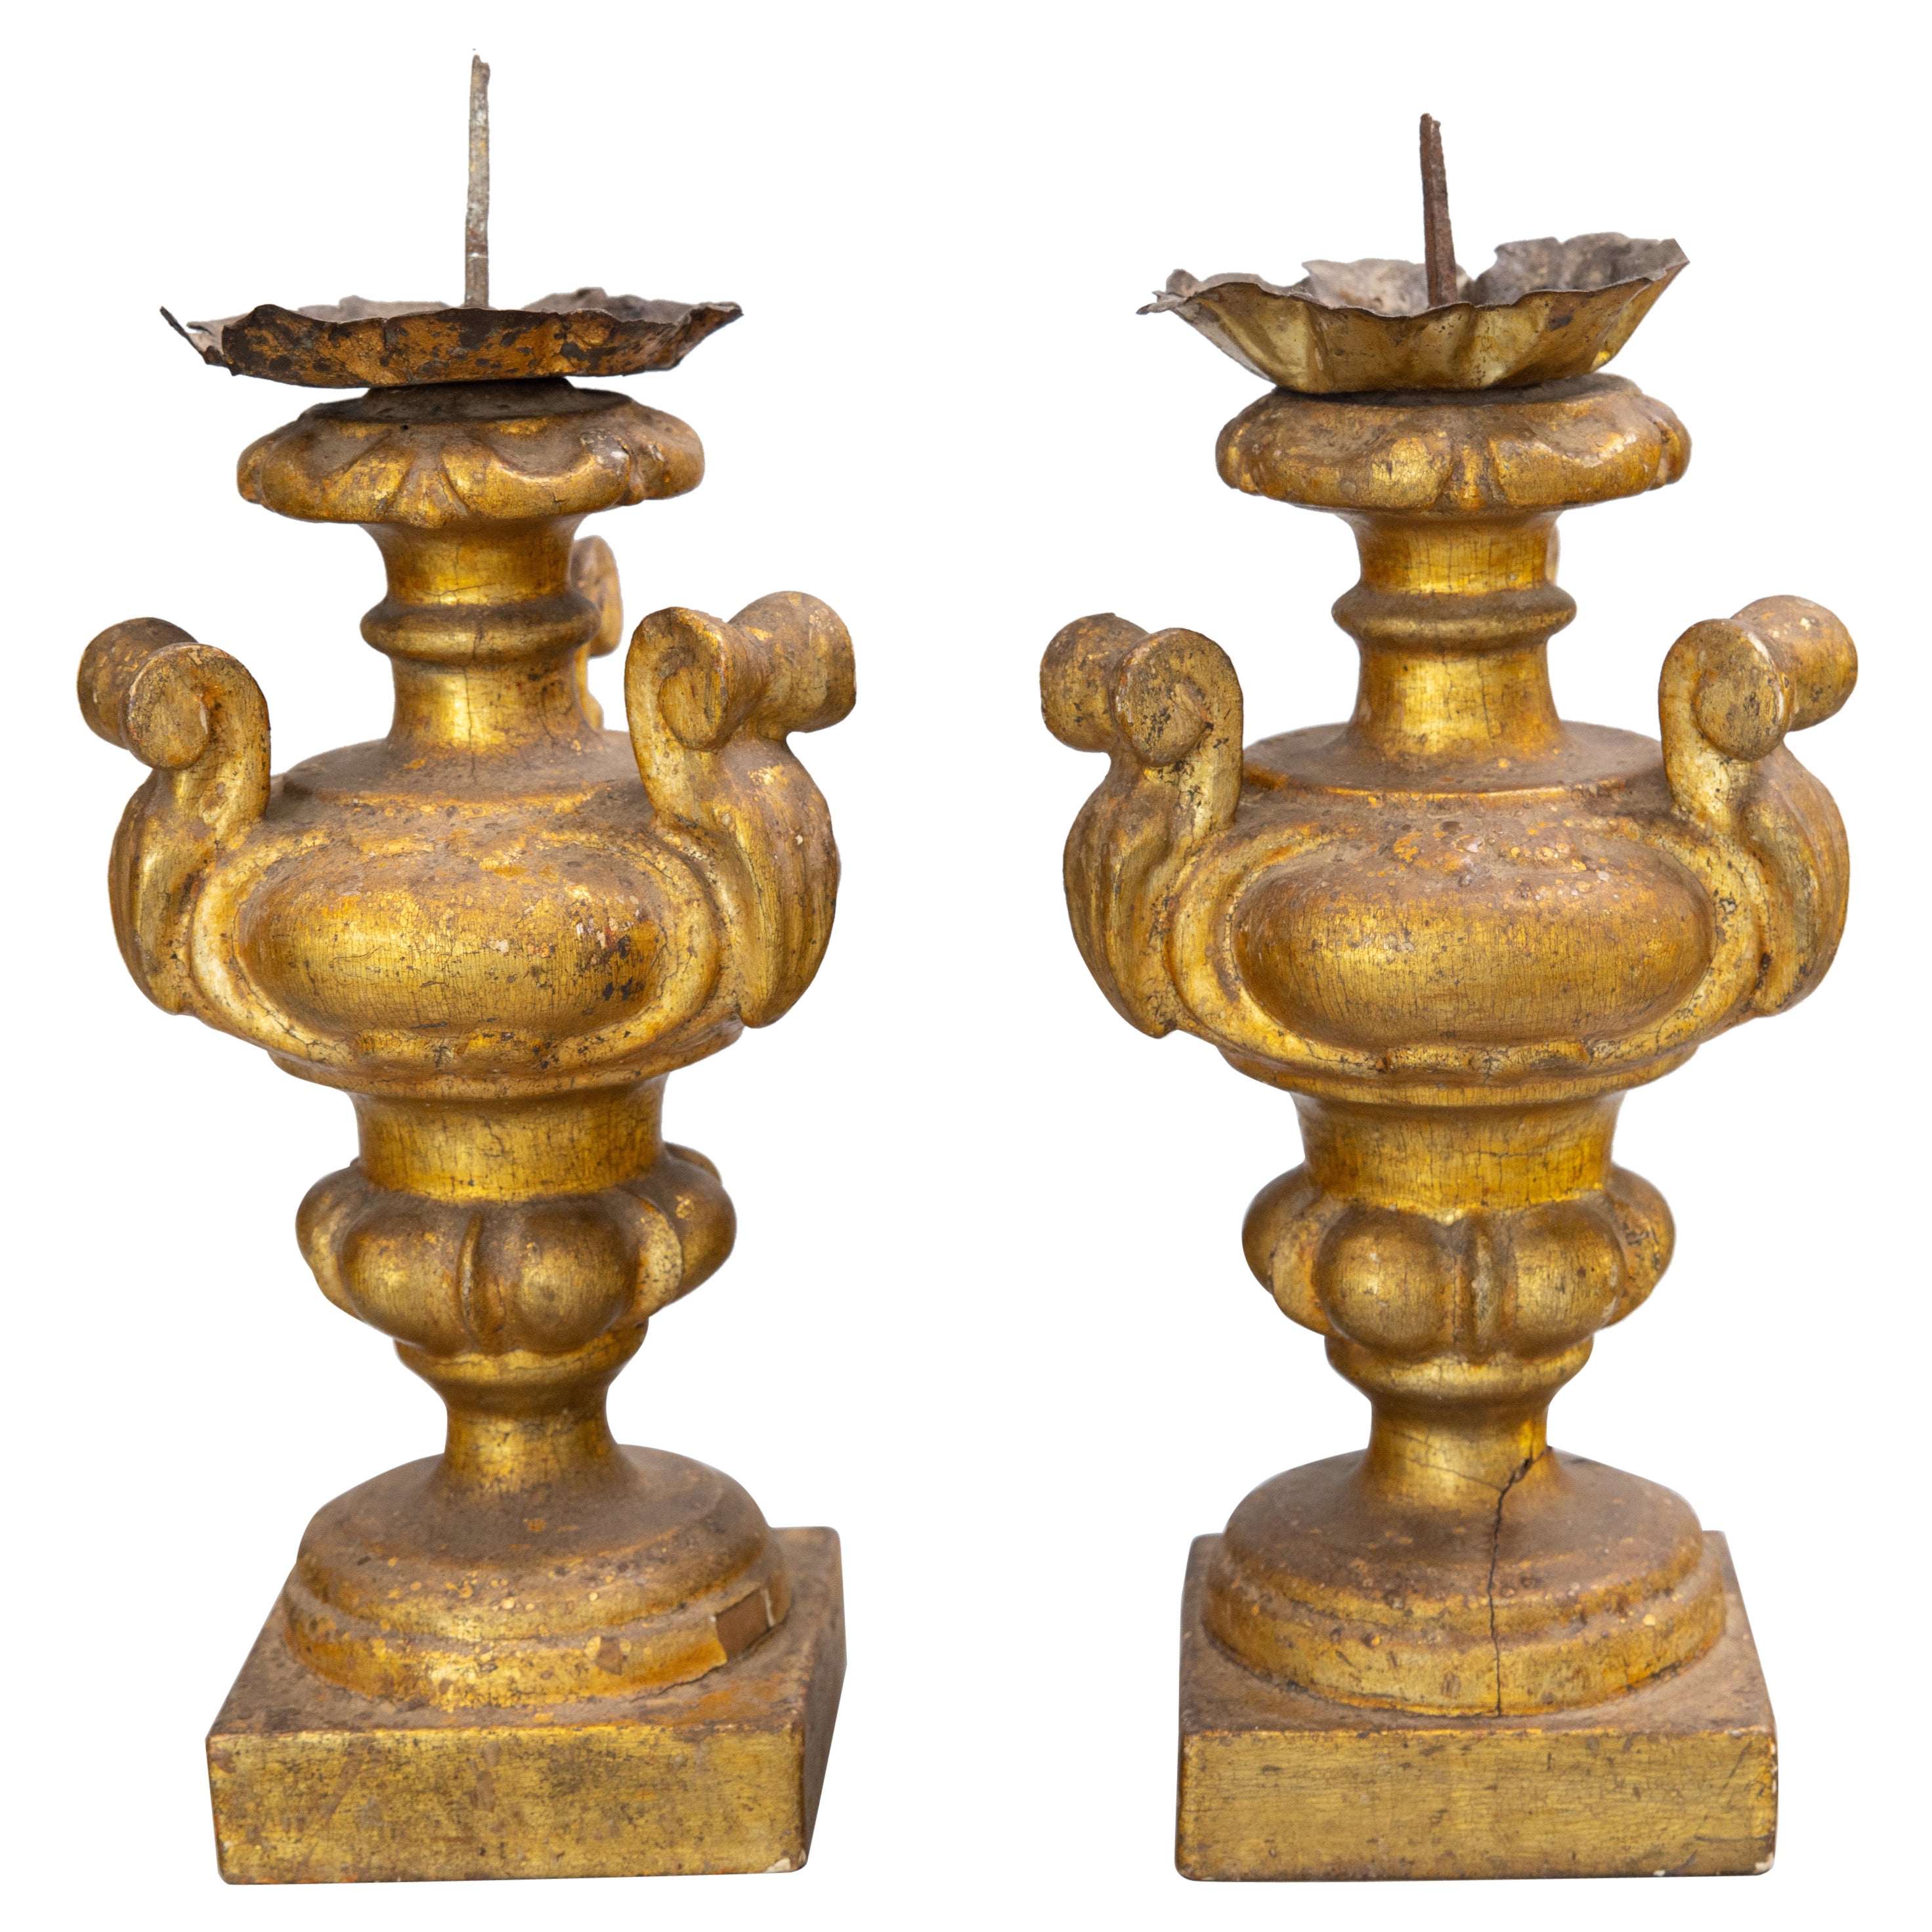 Pair of 18th Century Neoclassical Italian Giltwood Urns Pricket Candlesticks